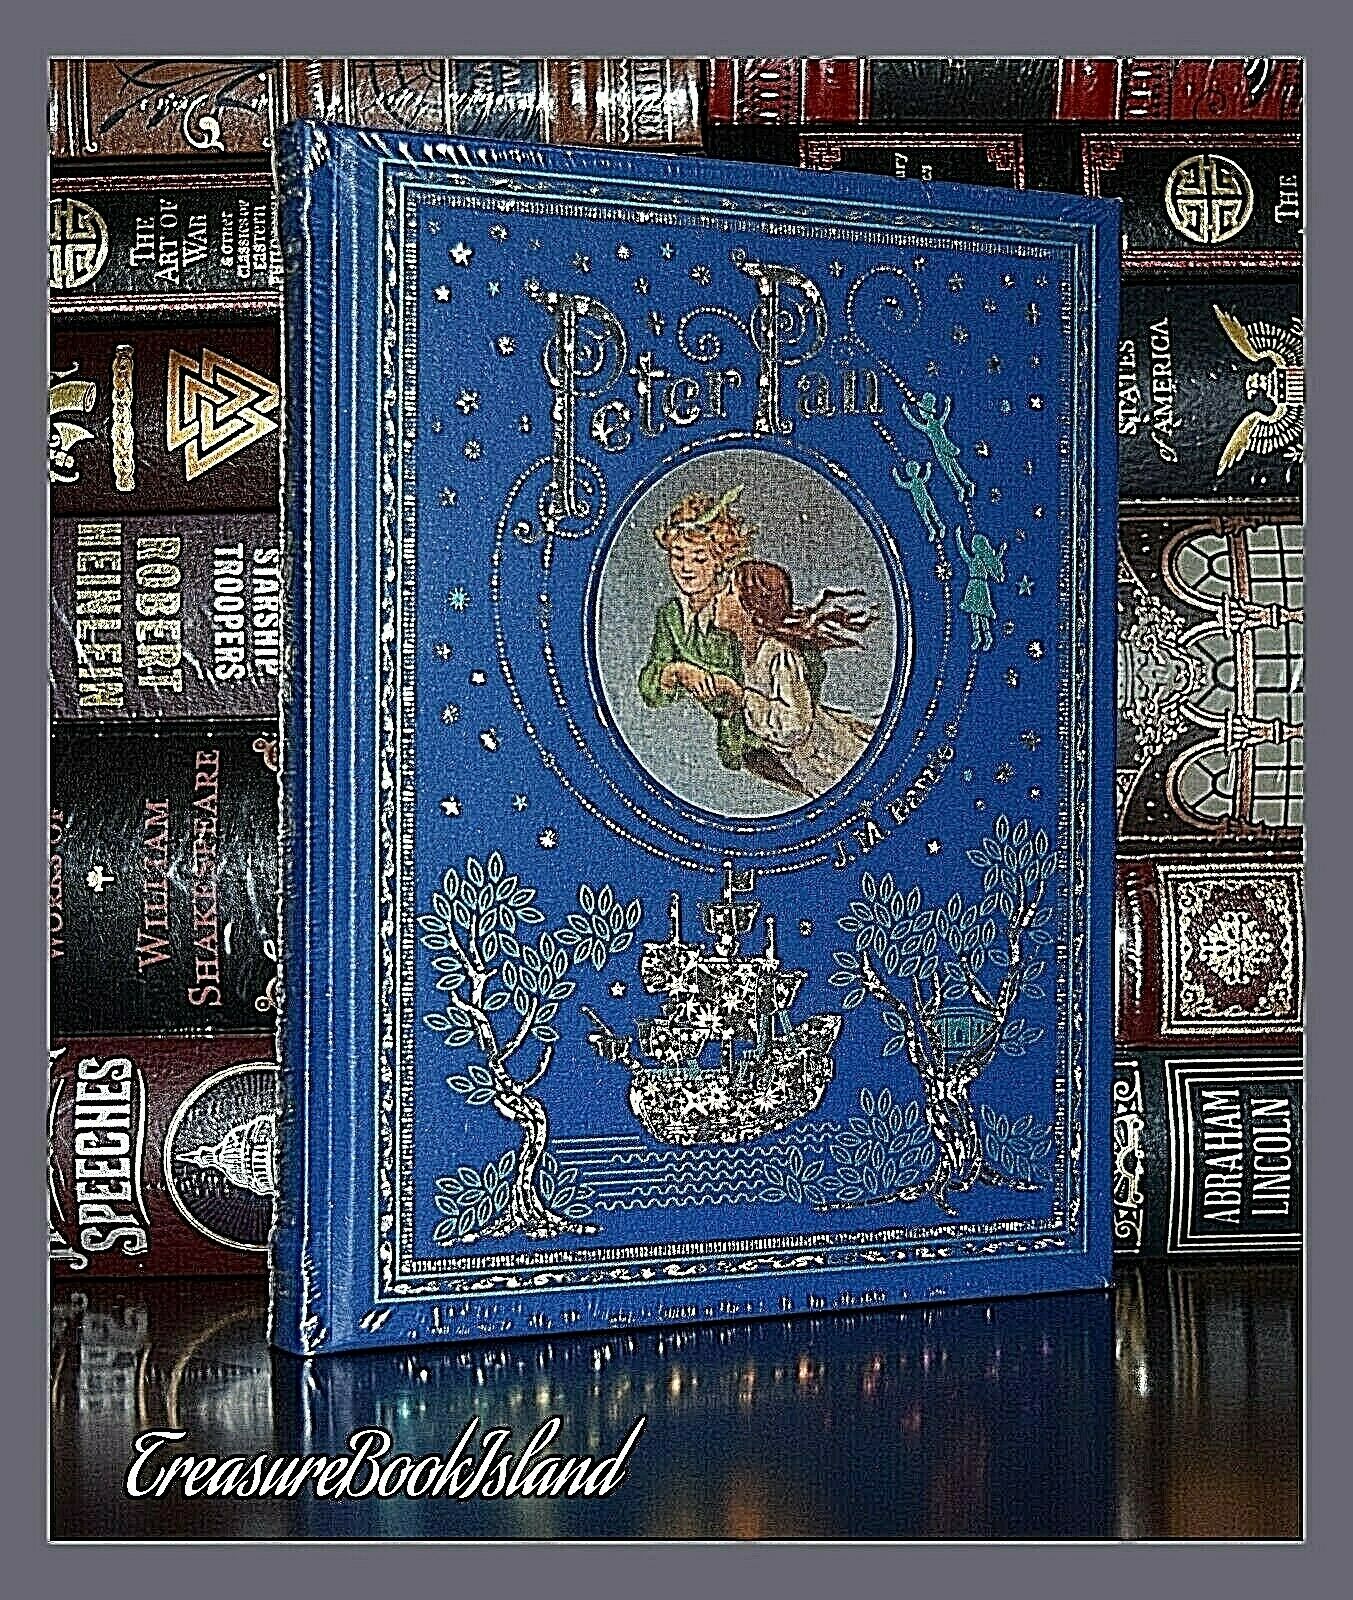 New Peter Pan By Barrie Illustrated Leather Sealed Bound Collectible Hardcover